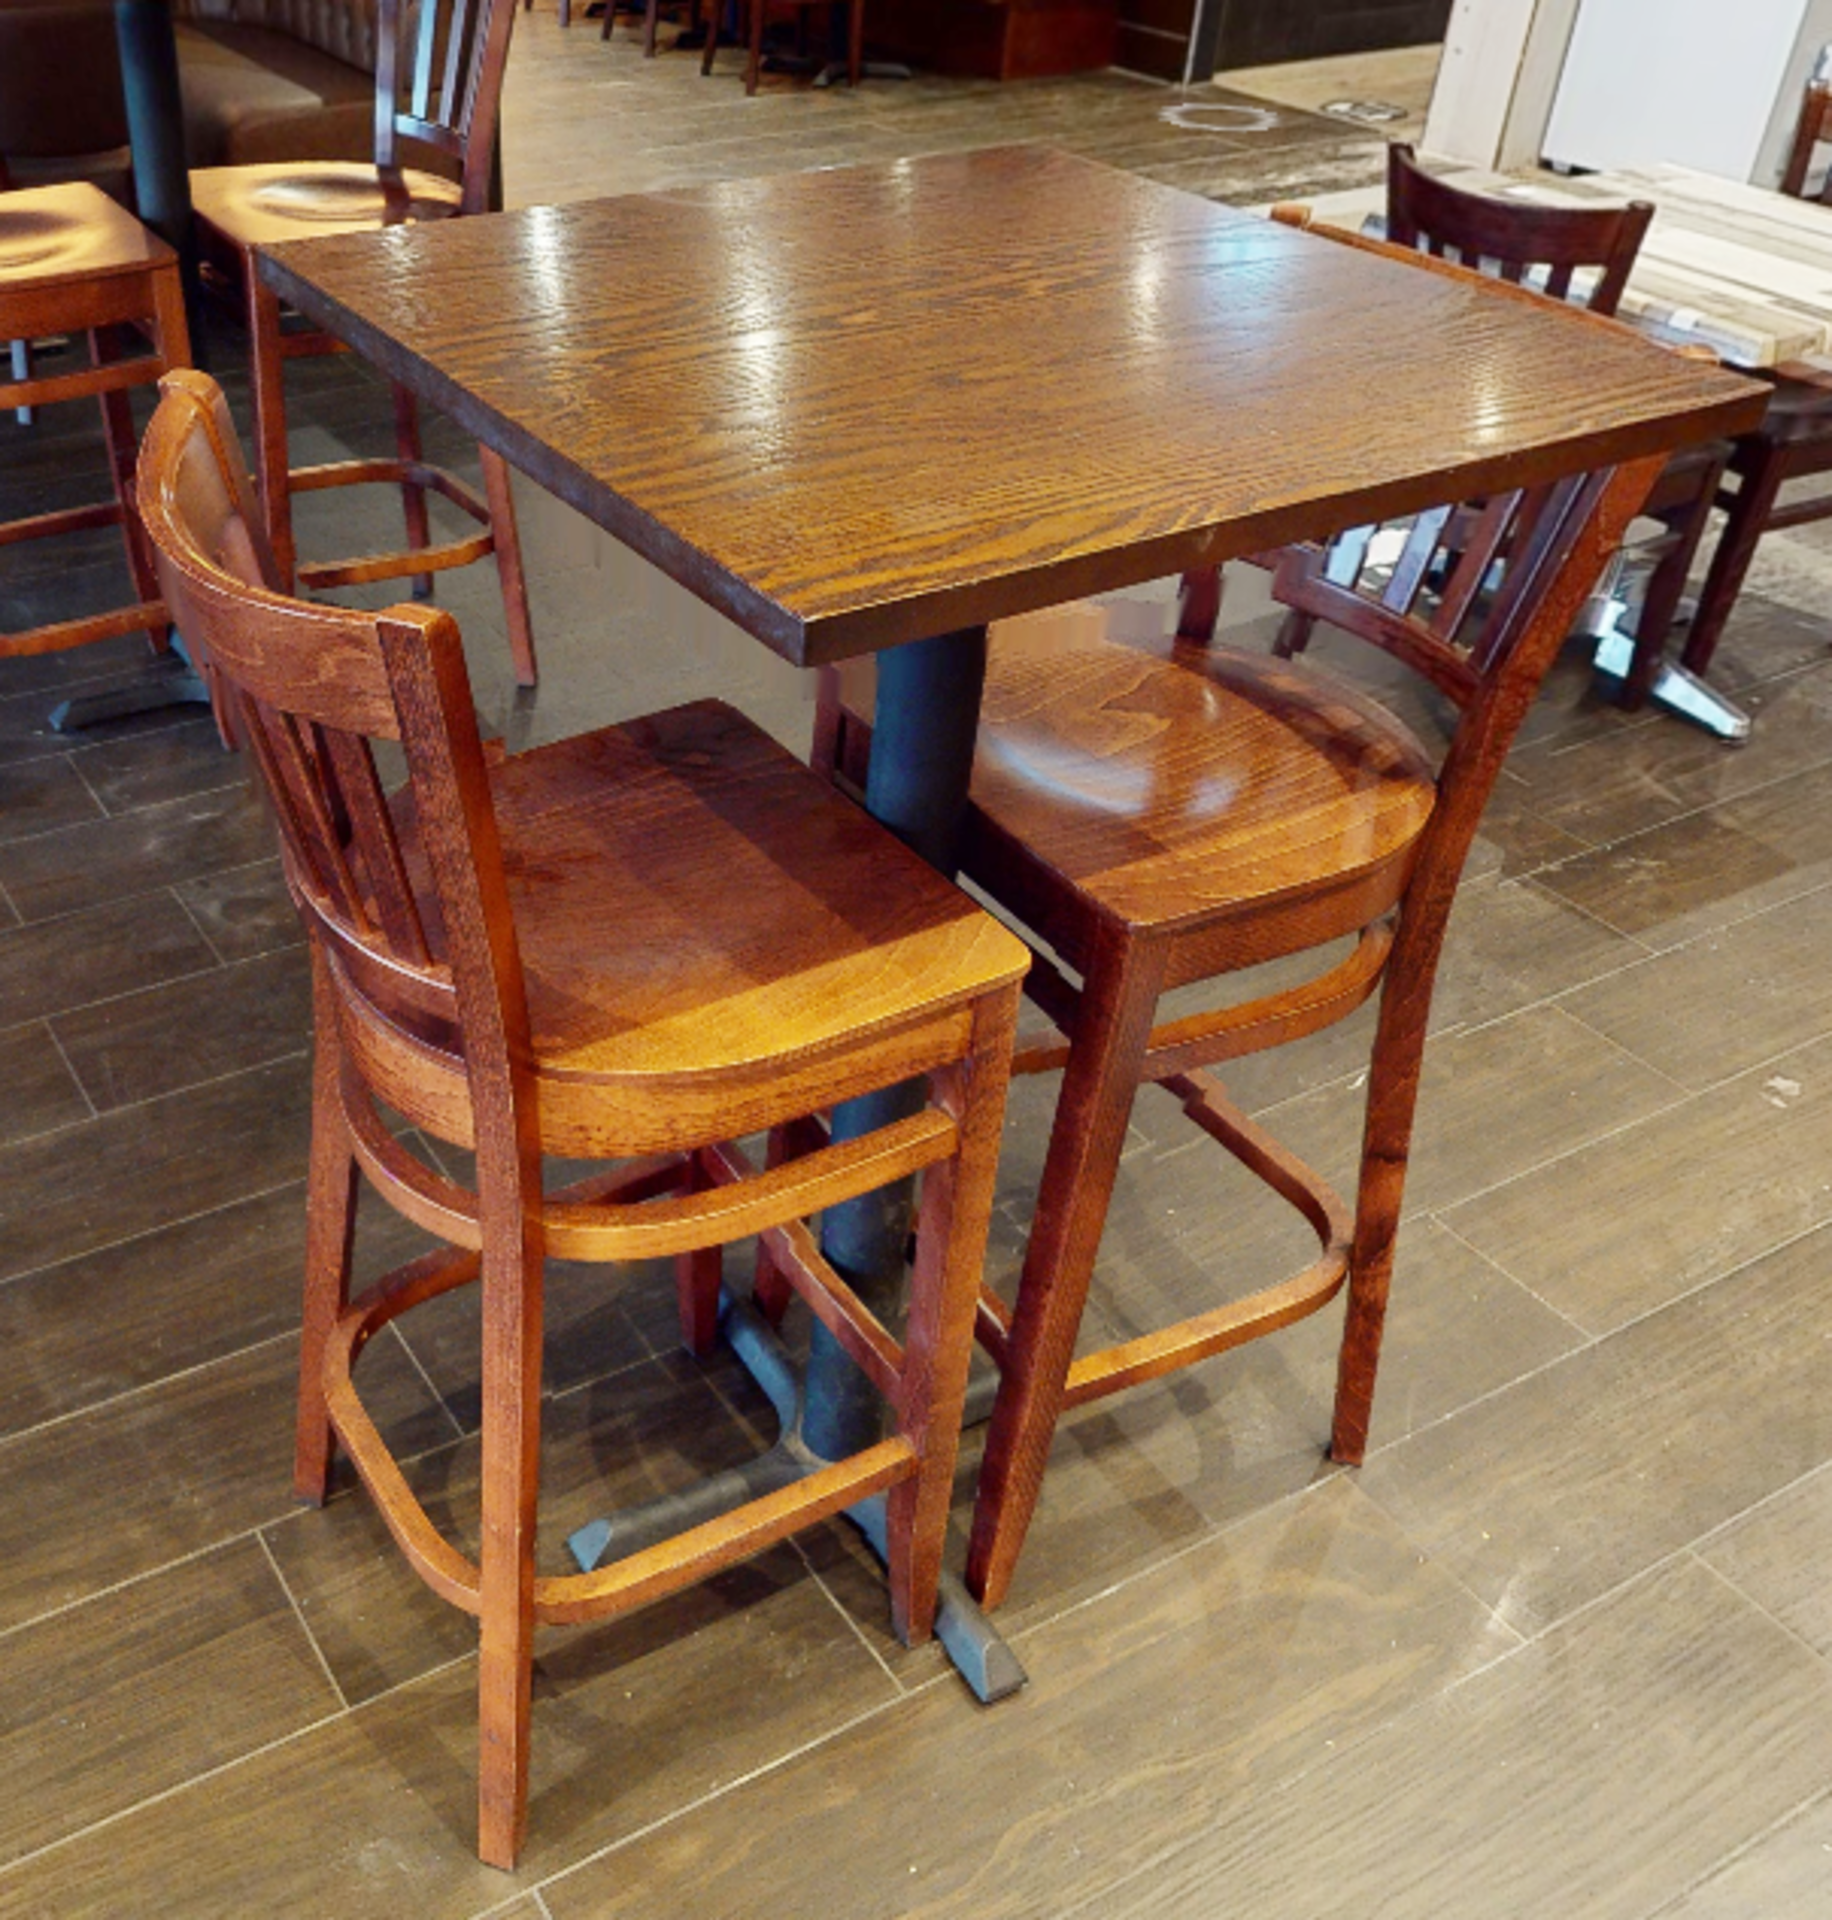 6 x Wooden Restaurant Barstools - CL701 - Location: Ashton Moss, Manchester, OL7Collections:This - Image 4 of 5